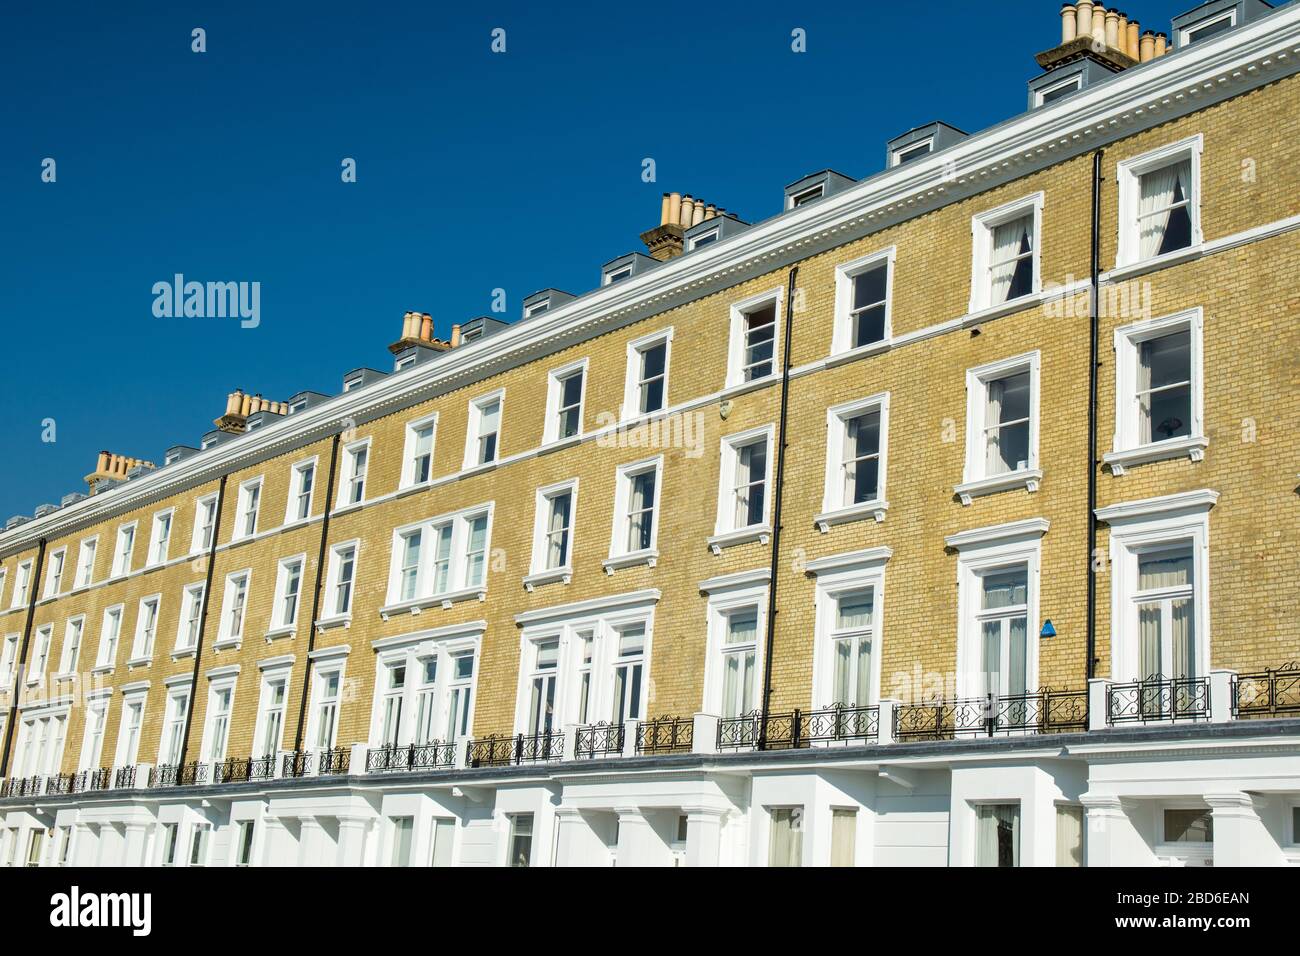 Looking up at modern London townhouses with blue sky Stock Photo